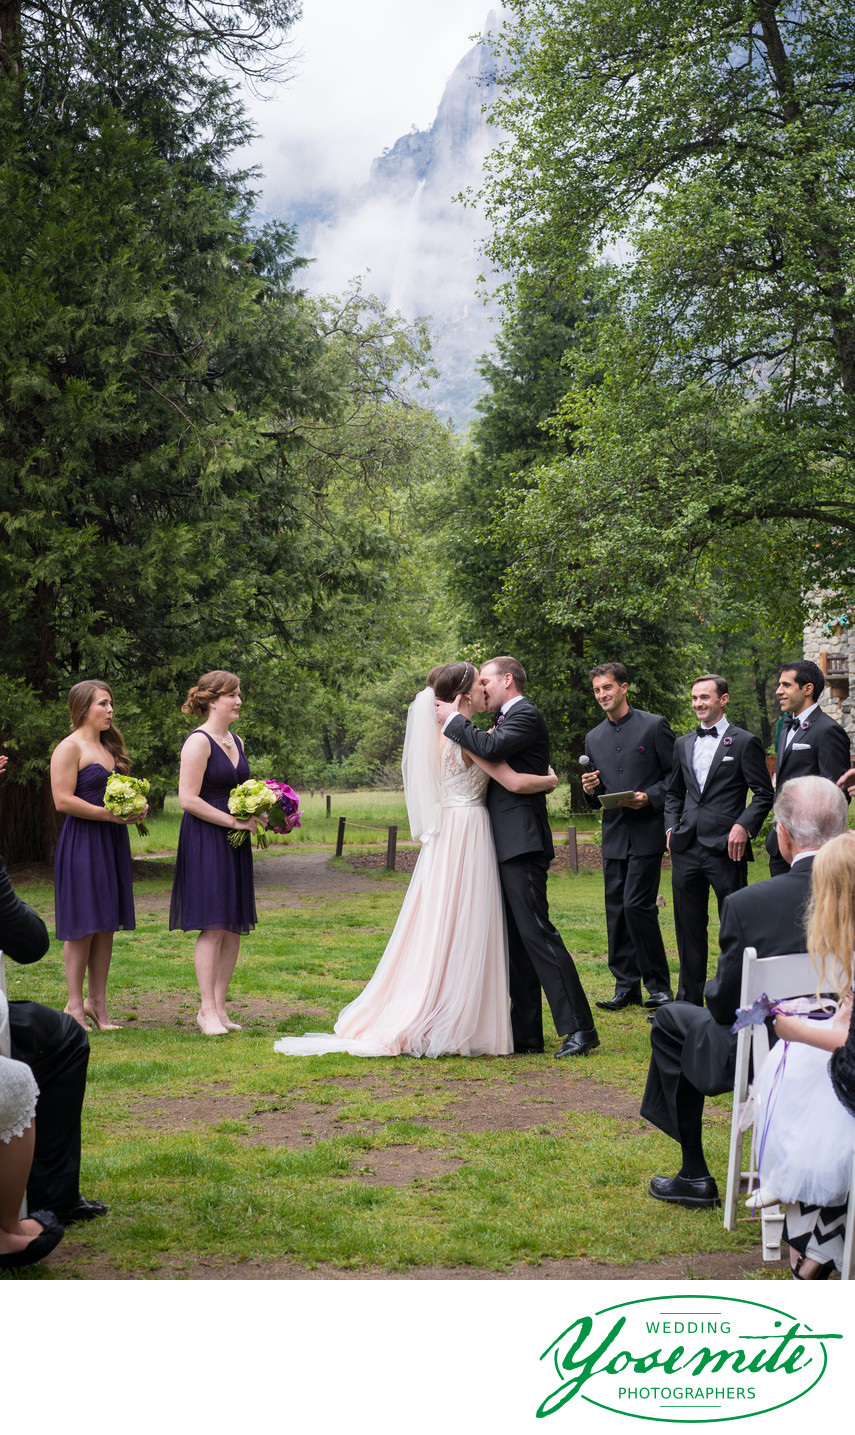 The Kiss During Ceremony At Majestic Yosemite Hotel